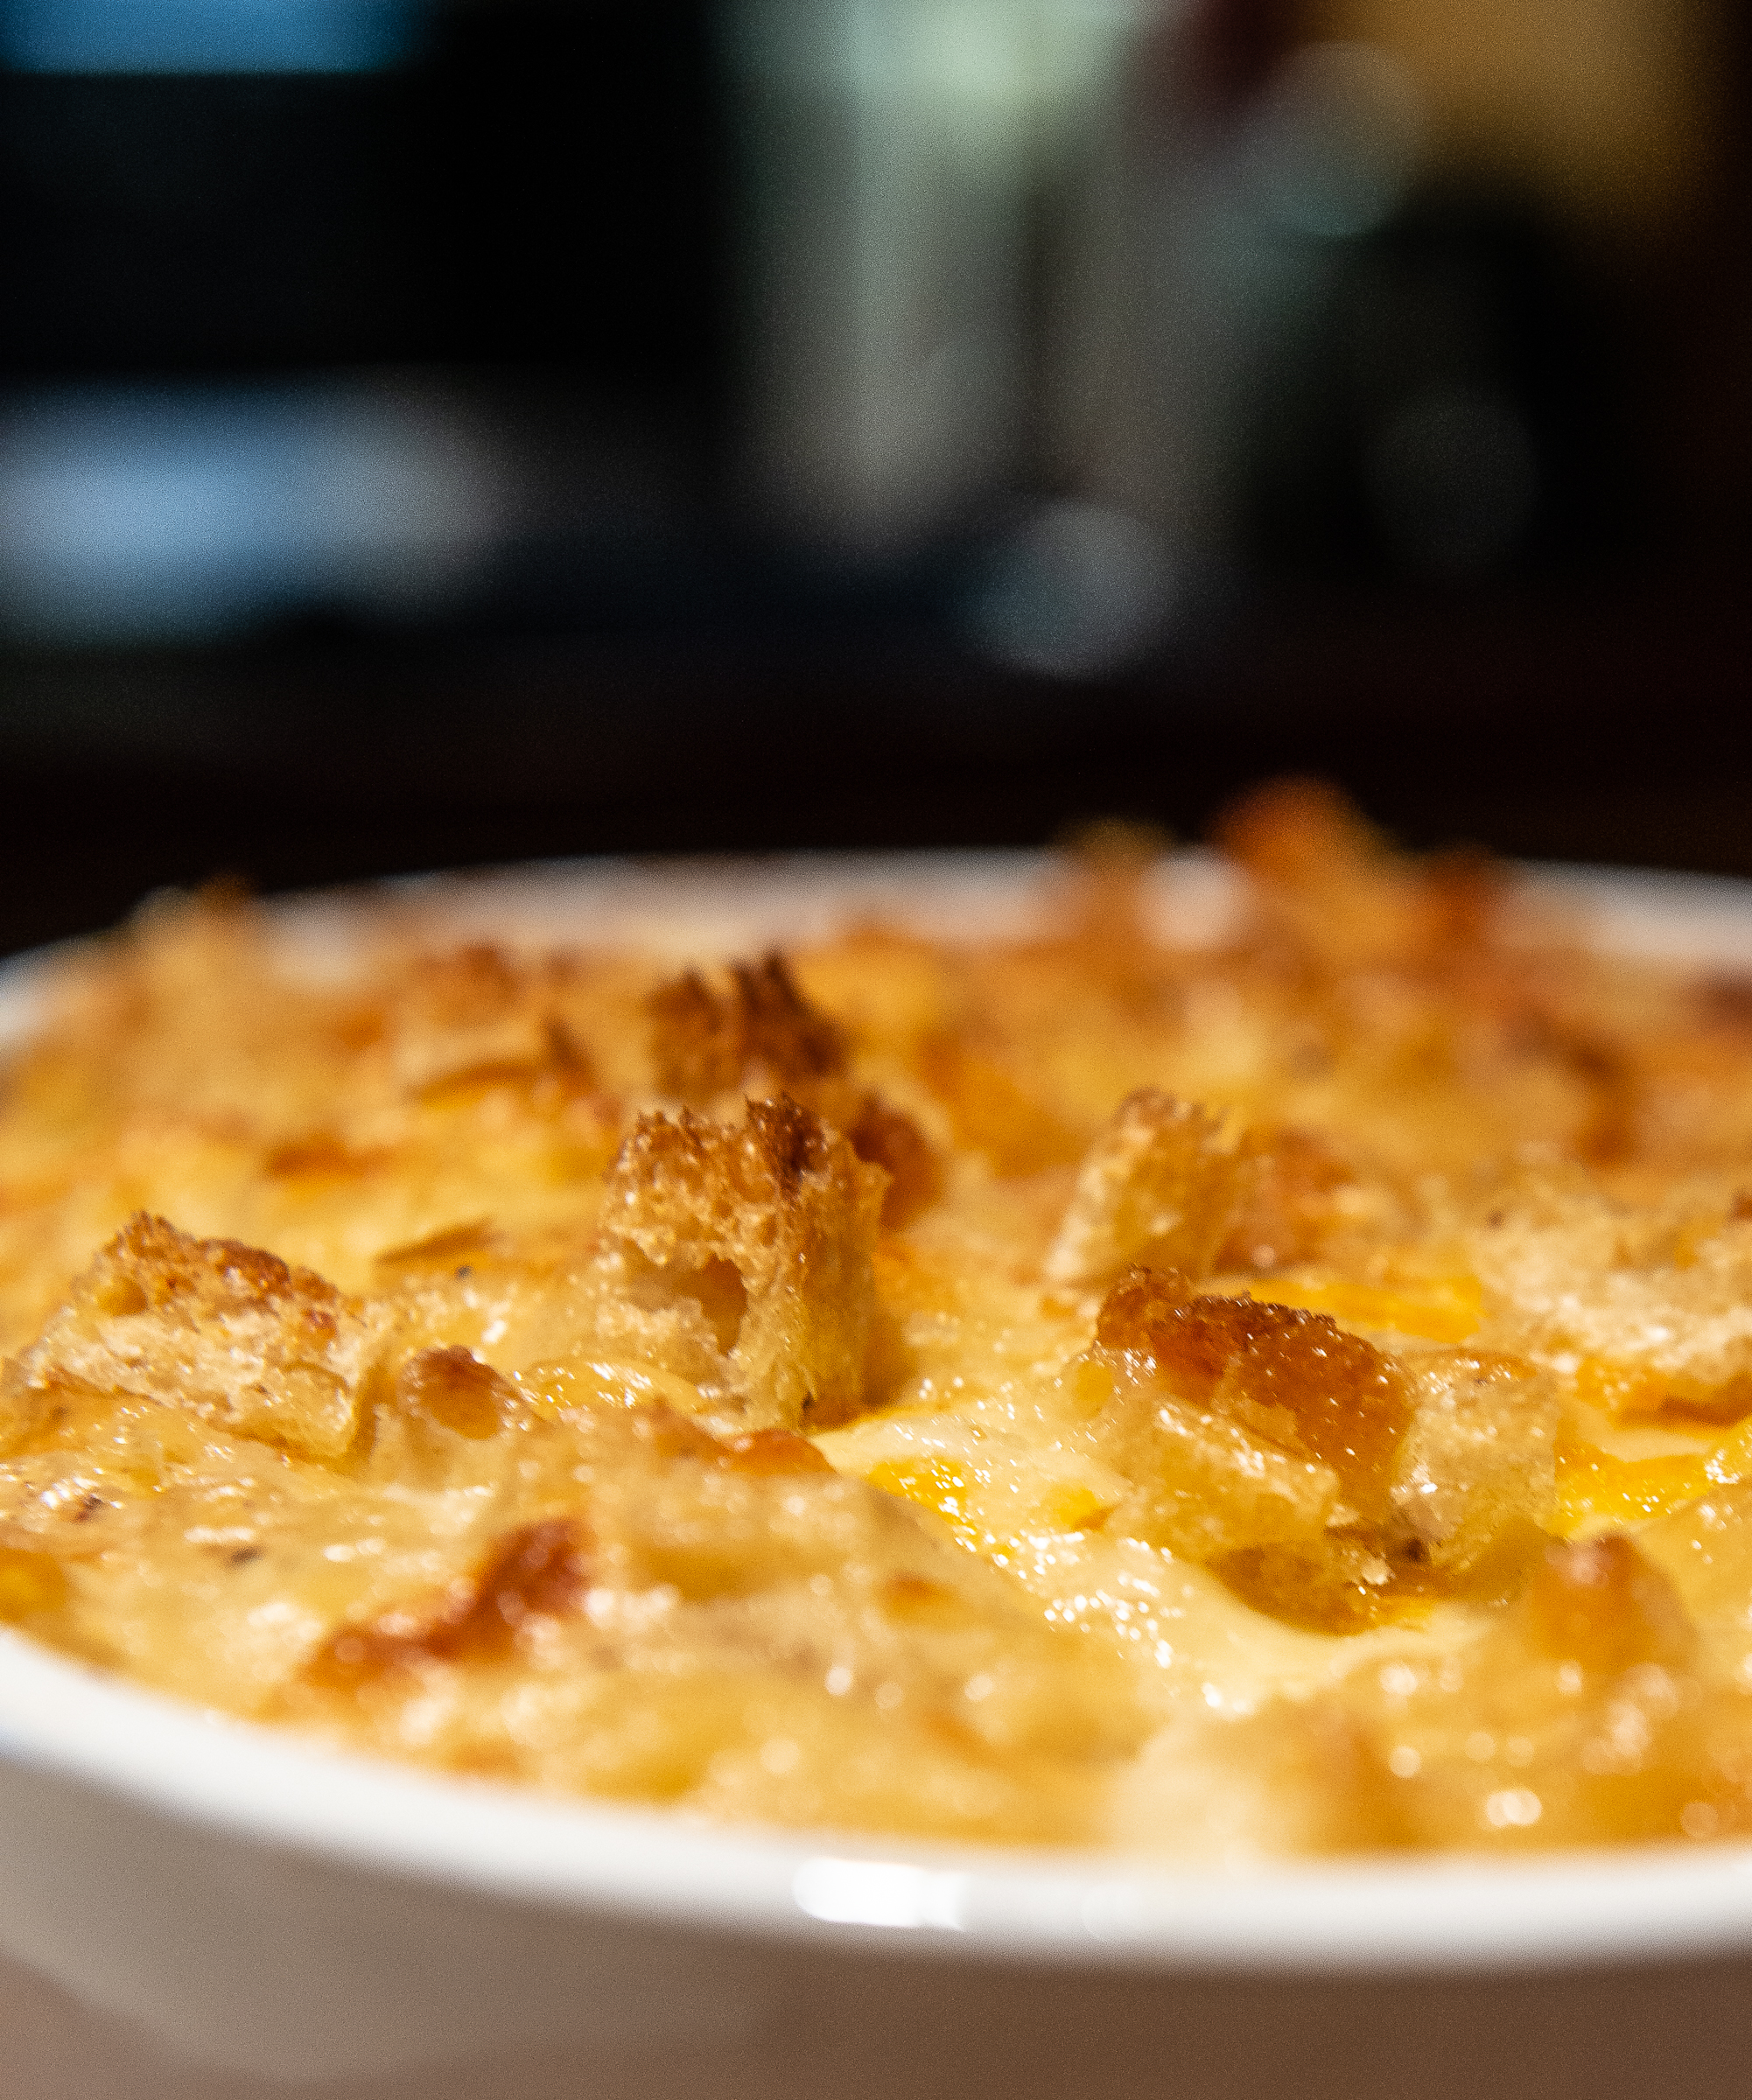 Thomas Jefferson and Thomas Keller: Elevating Macaroni and Cheese to an Art Form